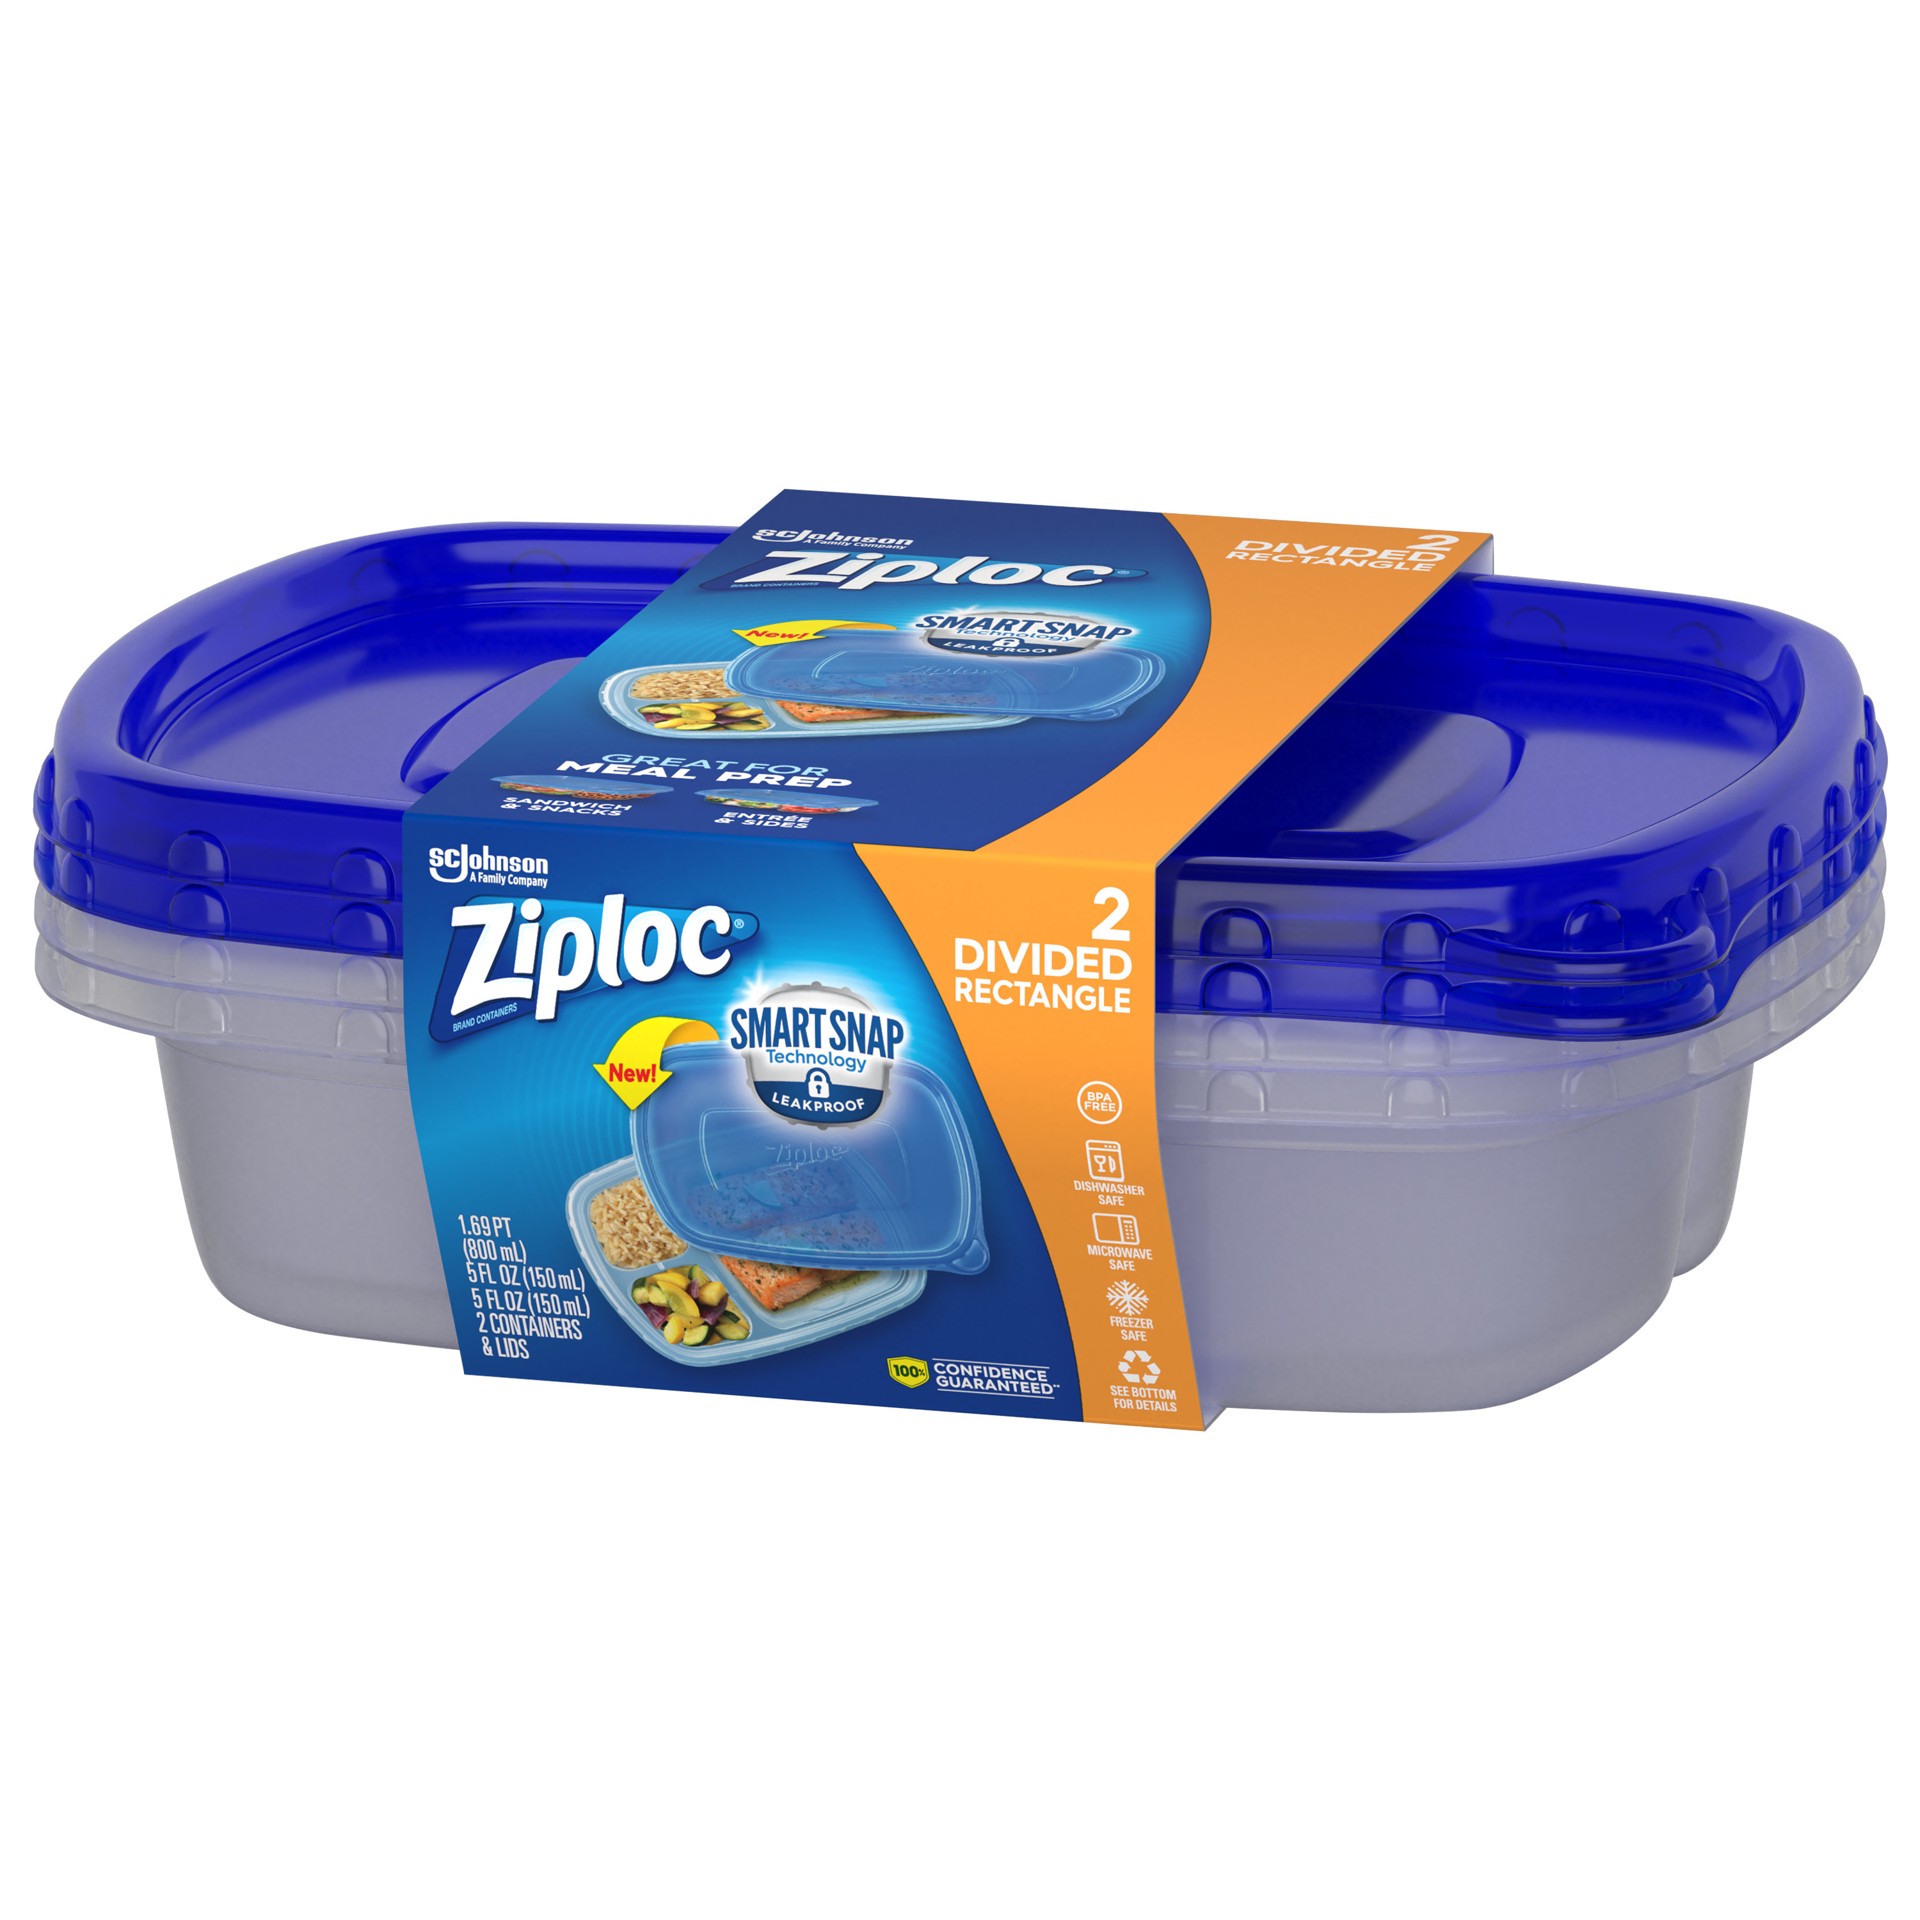 slide 5 of 5, Ziploc Brand, Food Storage Containers with Lids, Smart Snap Technology, Divided Rectangle, 2 ct, 2 ct